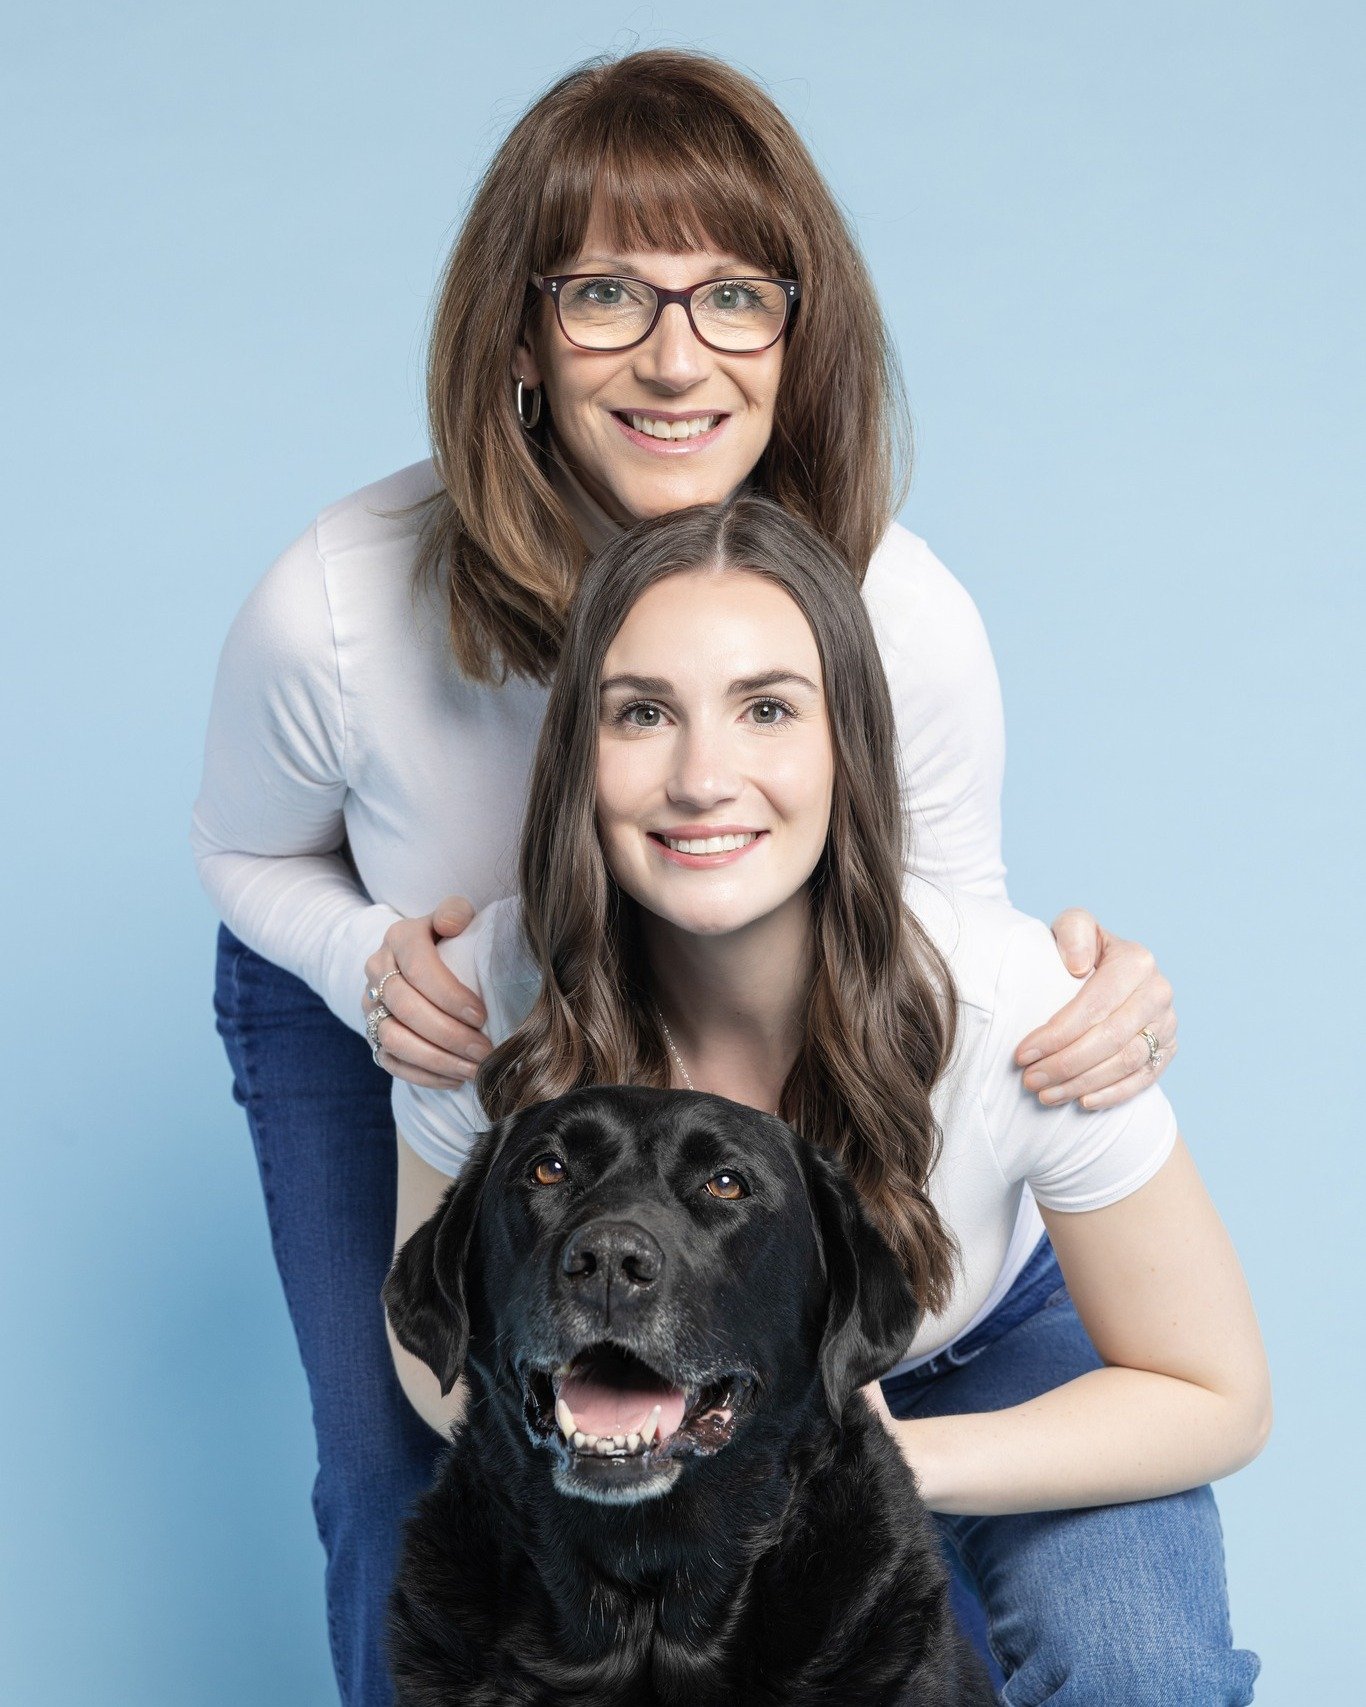 Bond and his family came to us for a mother-daughter-pup photo session to celebrate his mama's birthday. 🥰 They're the sweetest people and Bond is such a good boy during the shoot. 
.
 #torontodoglovers #torontodogsofinstagram #cutepetclub #dogphoto